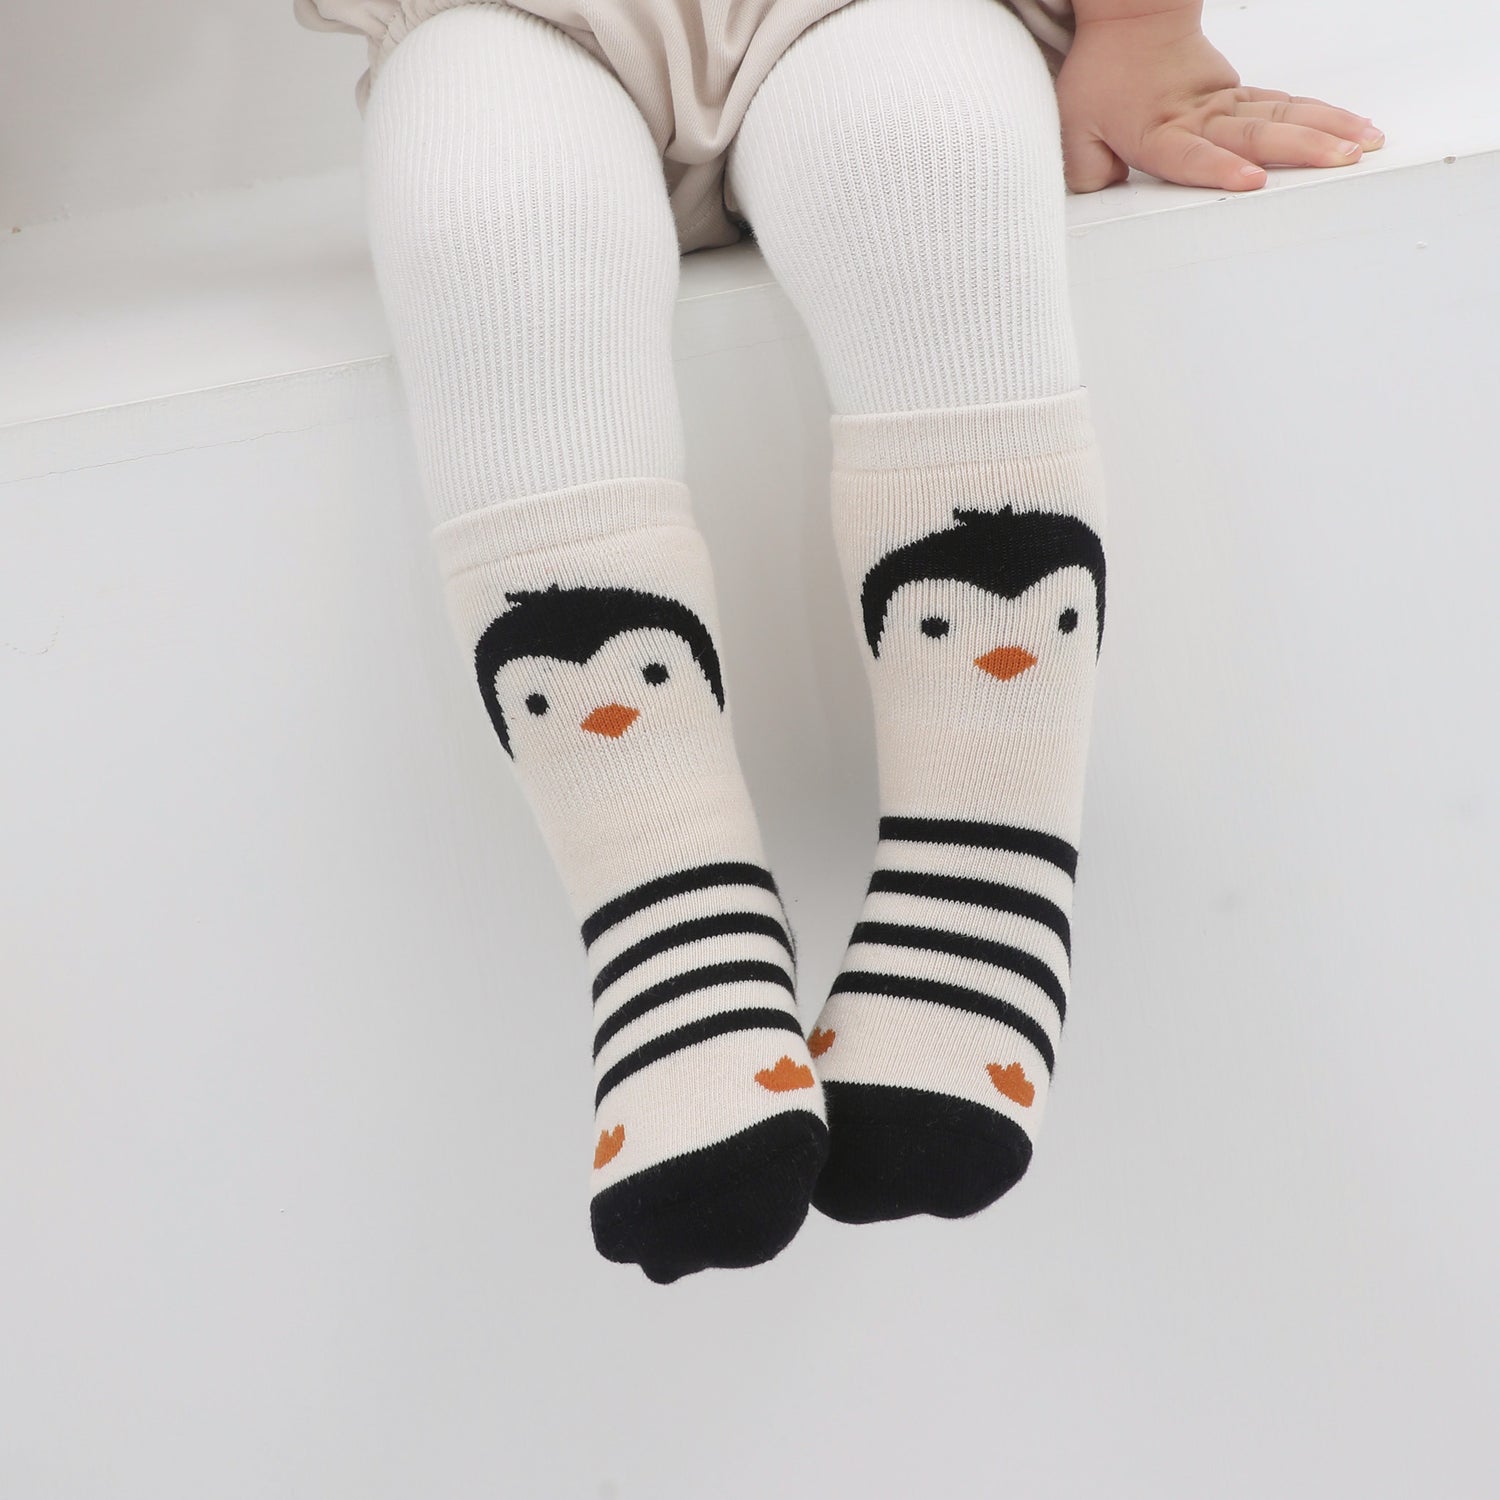 Low-cut floor socks with anti-slip design for toddlers